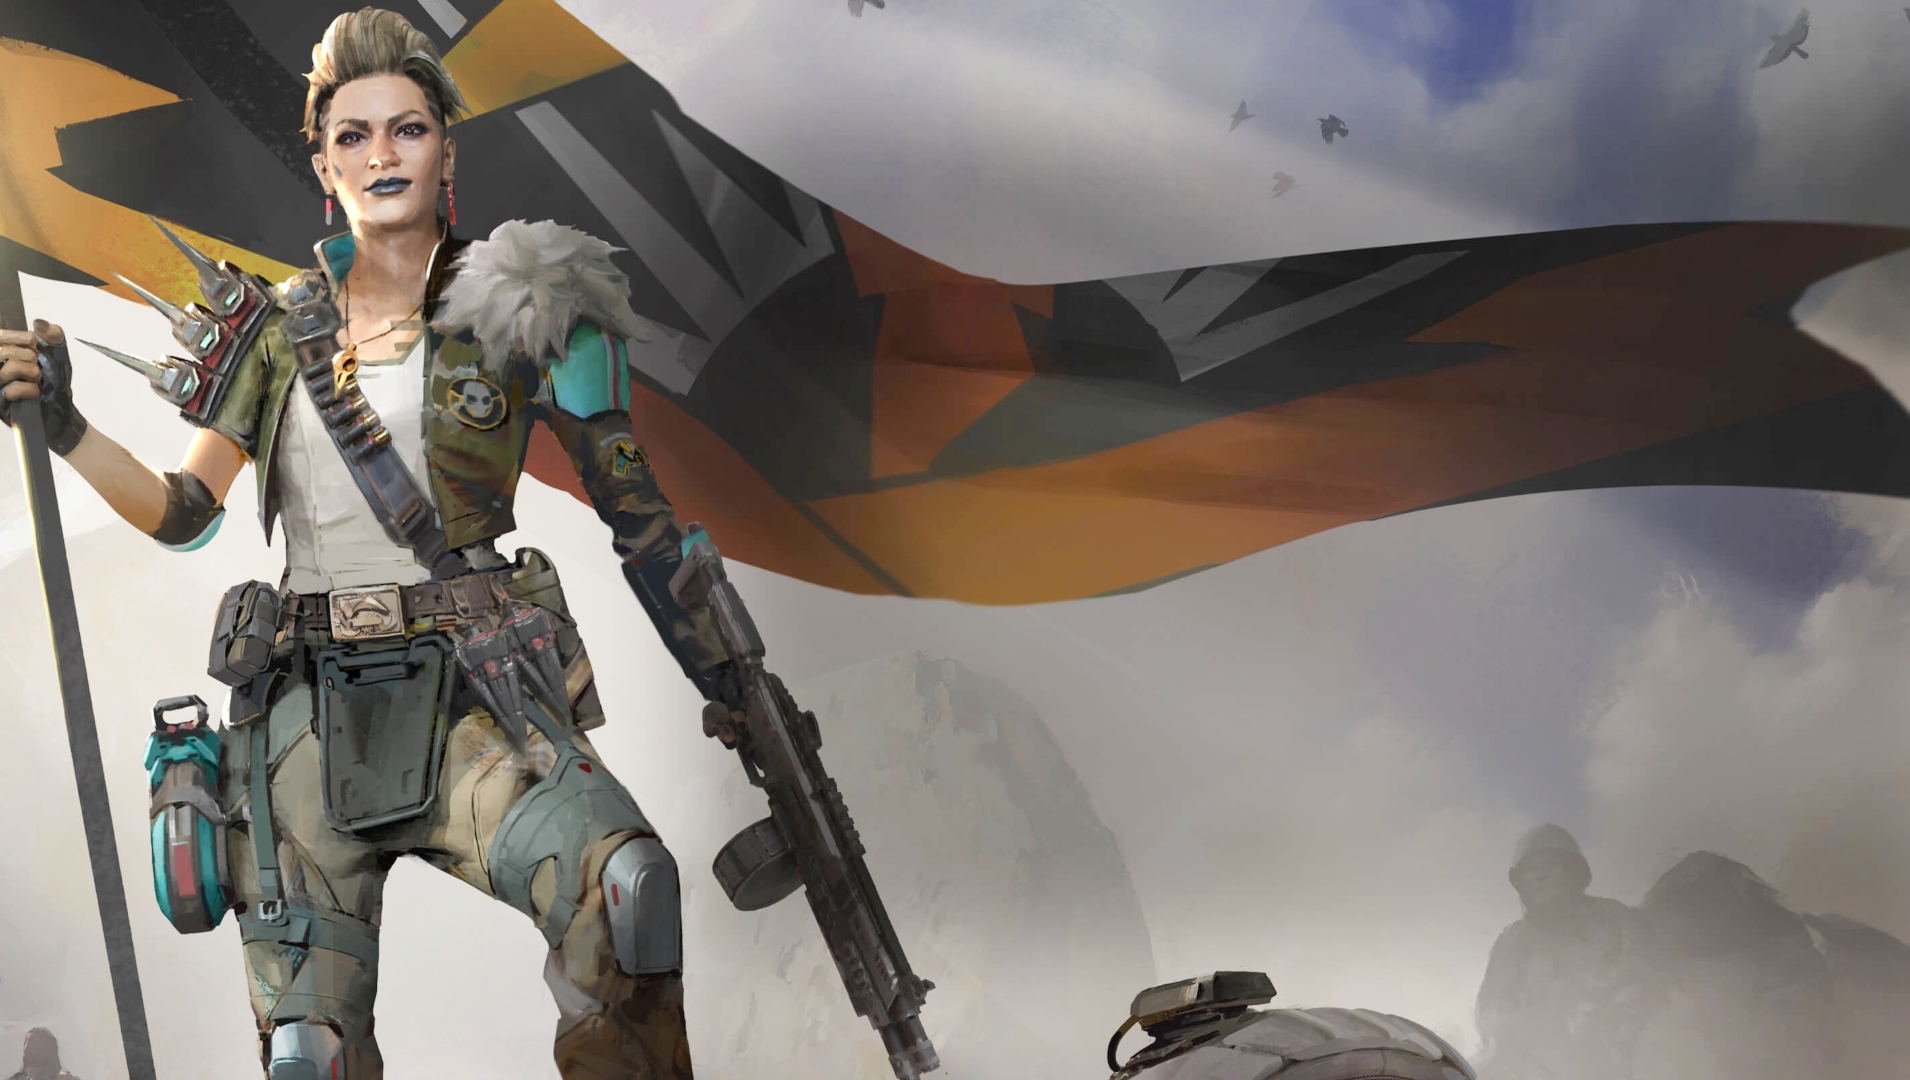 Apex Legends Mobile to shut down May 1st. The game will be removed